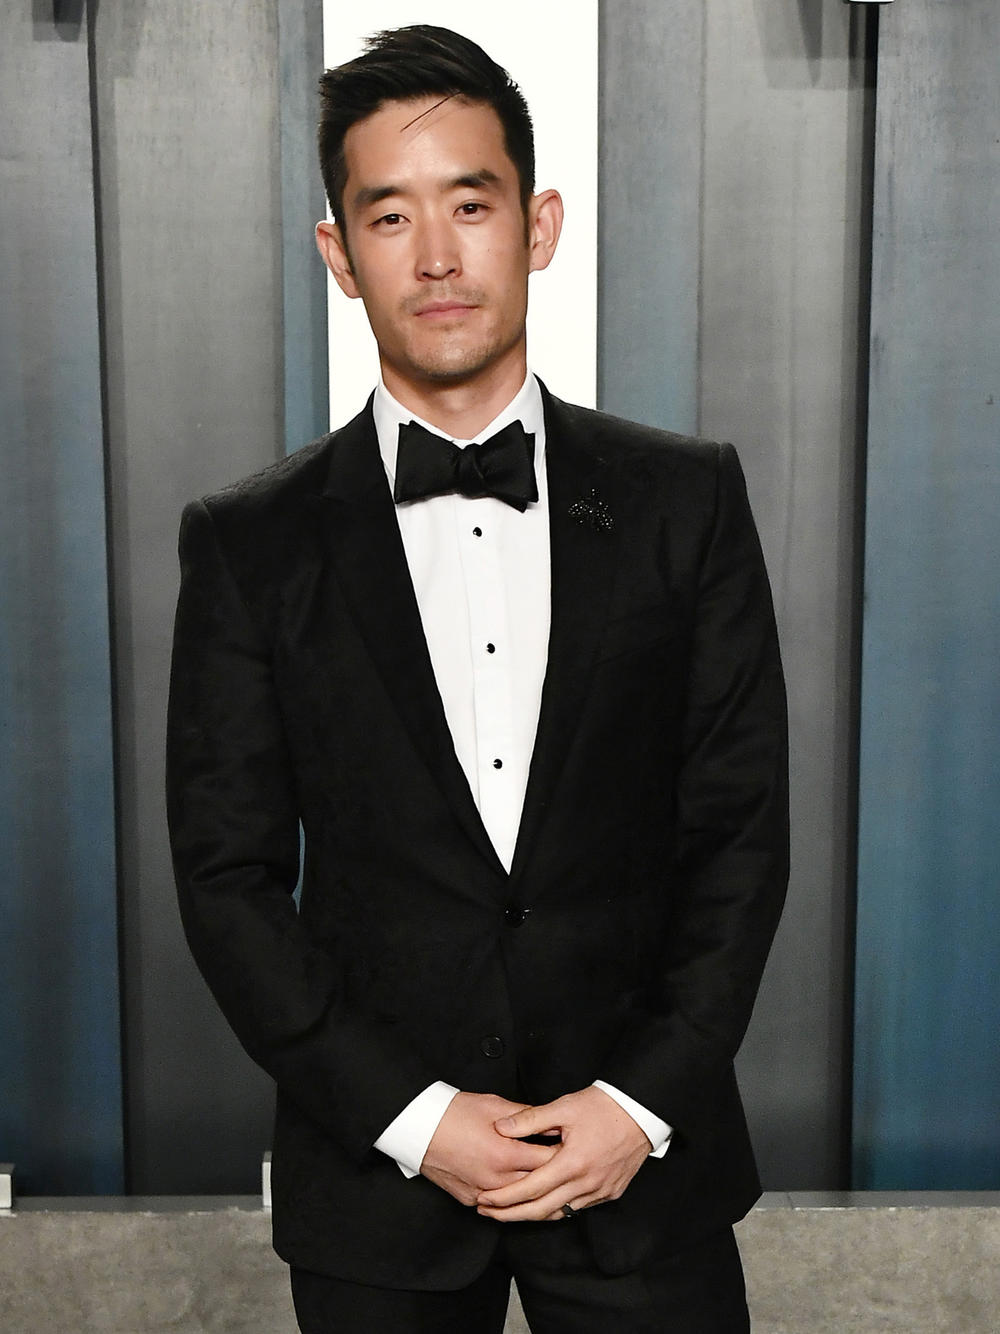 Mike Moh attends the 2020 Vanity Fair Oscar Party hosted by Radhika Jones at Wallis Annenberg Center for the Performing Arts on February 09, 2020 in Beverly Hills, California.